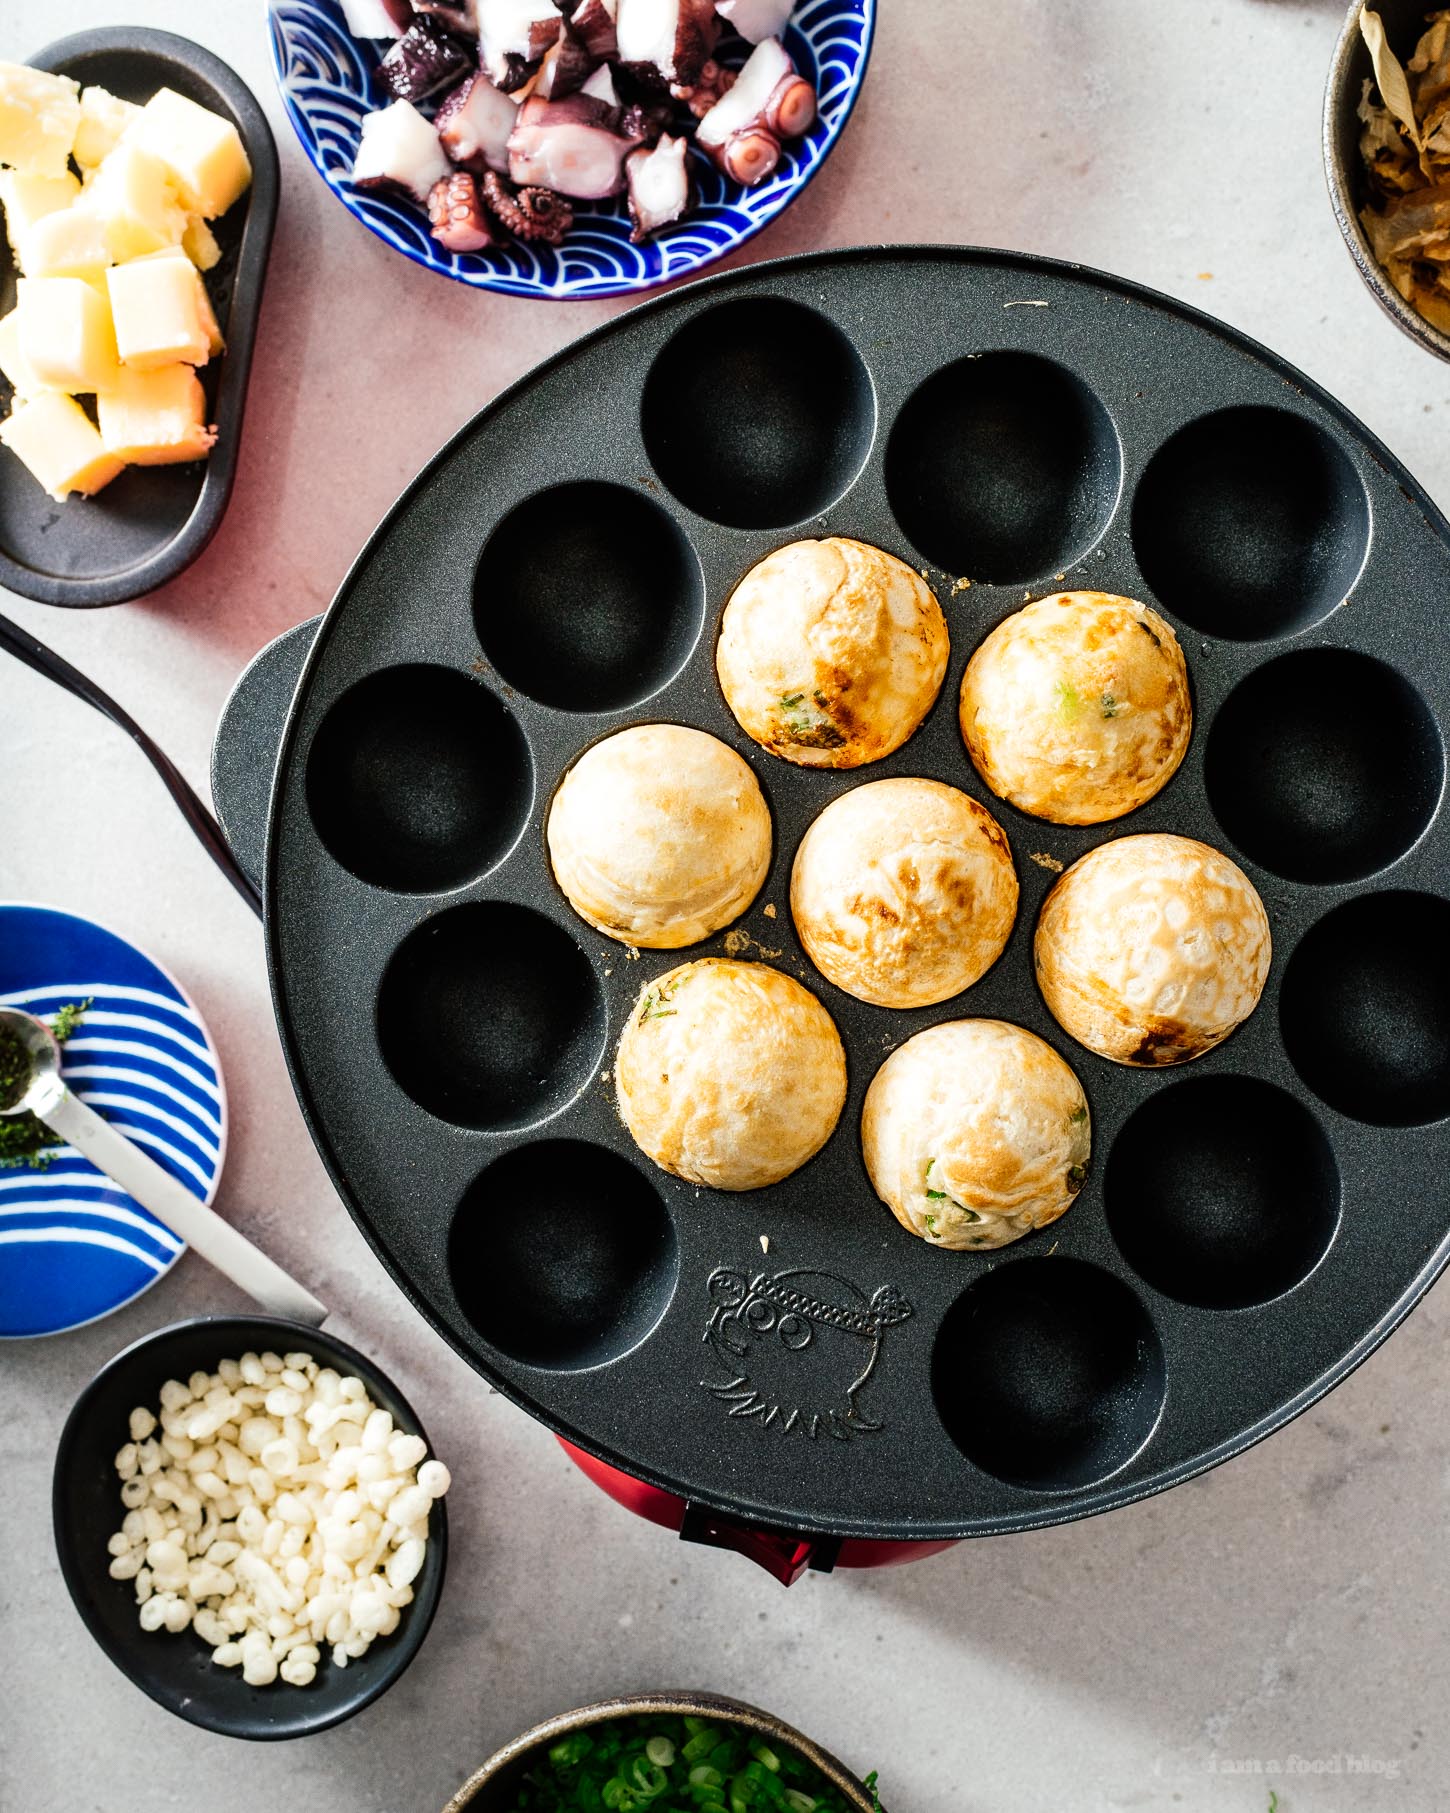 Throw a Japanese takoyaki dinner party with this takoyaki, the ultimate Japanese street food at the table with friends and family. Interactive, fun, and delicious! Authentic takoyaki recipe #japanesefood #recipes #takoyaki #streetfood #japan #tokyo #howto